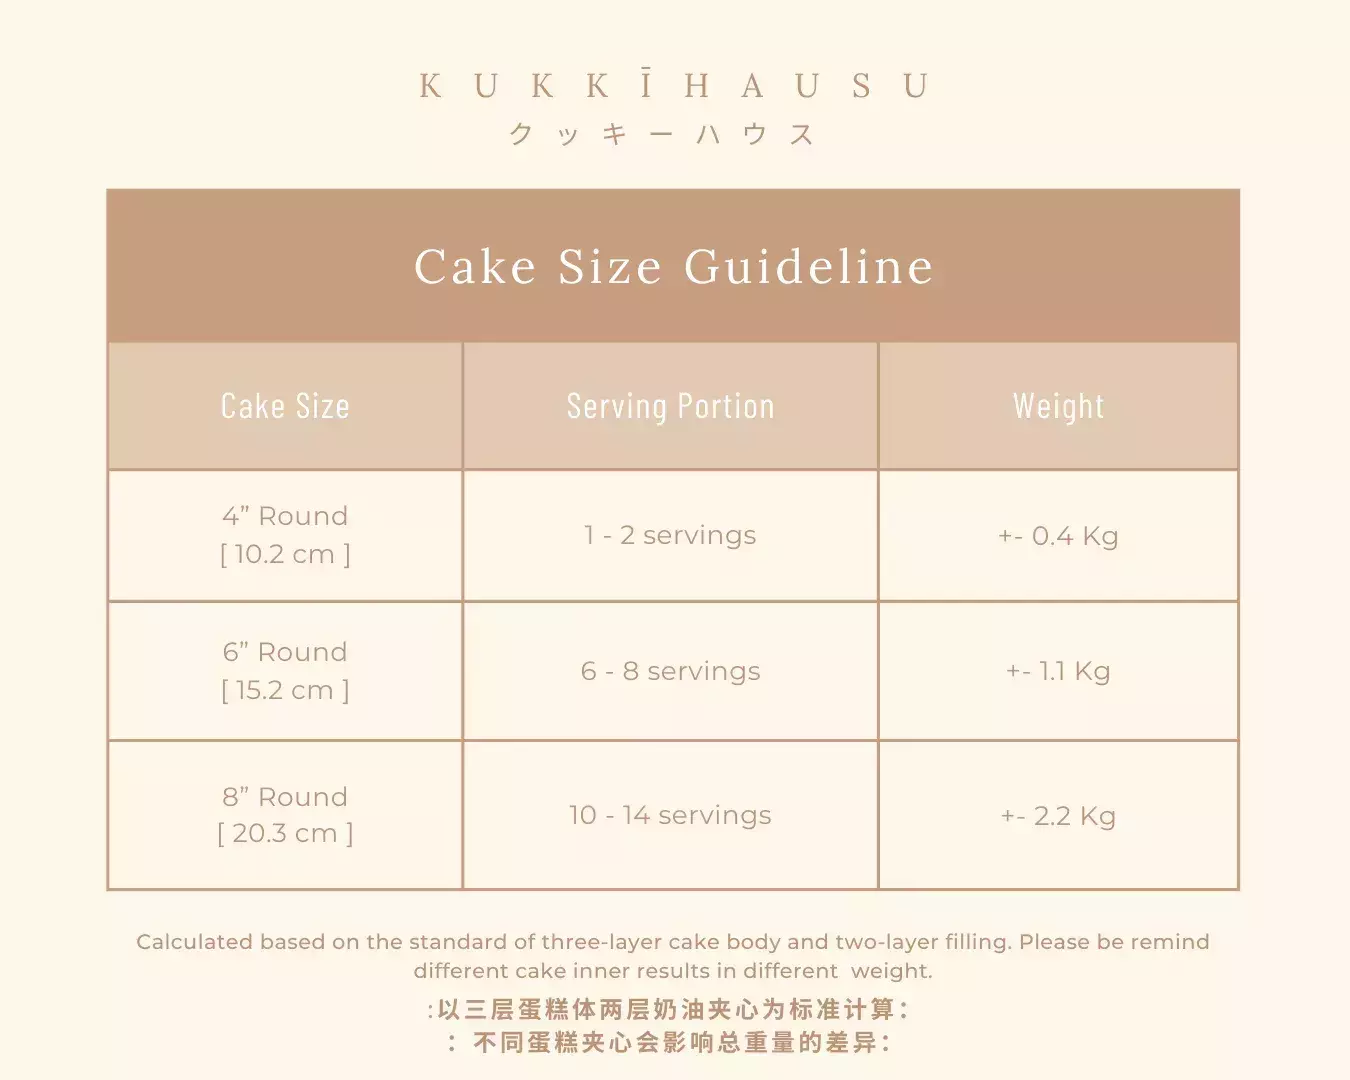 Cake Size Guideline